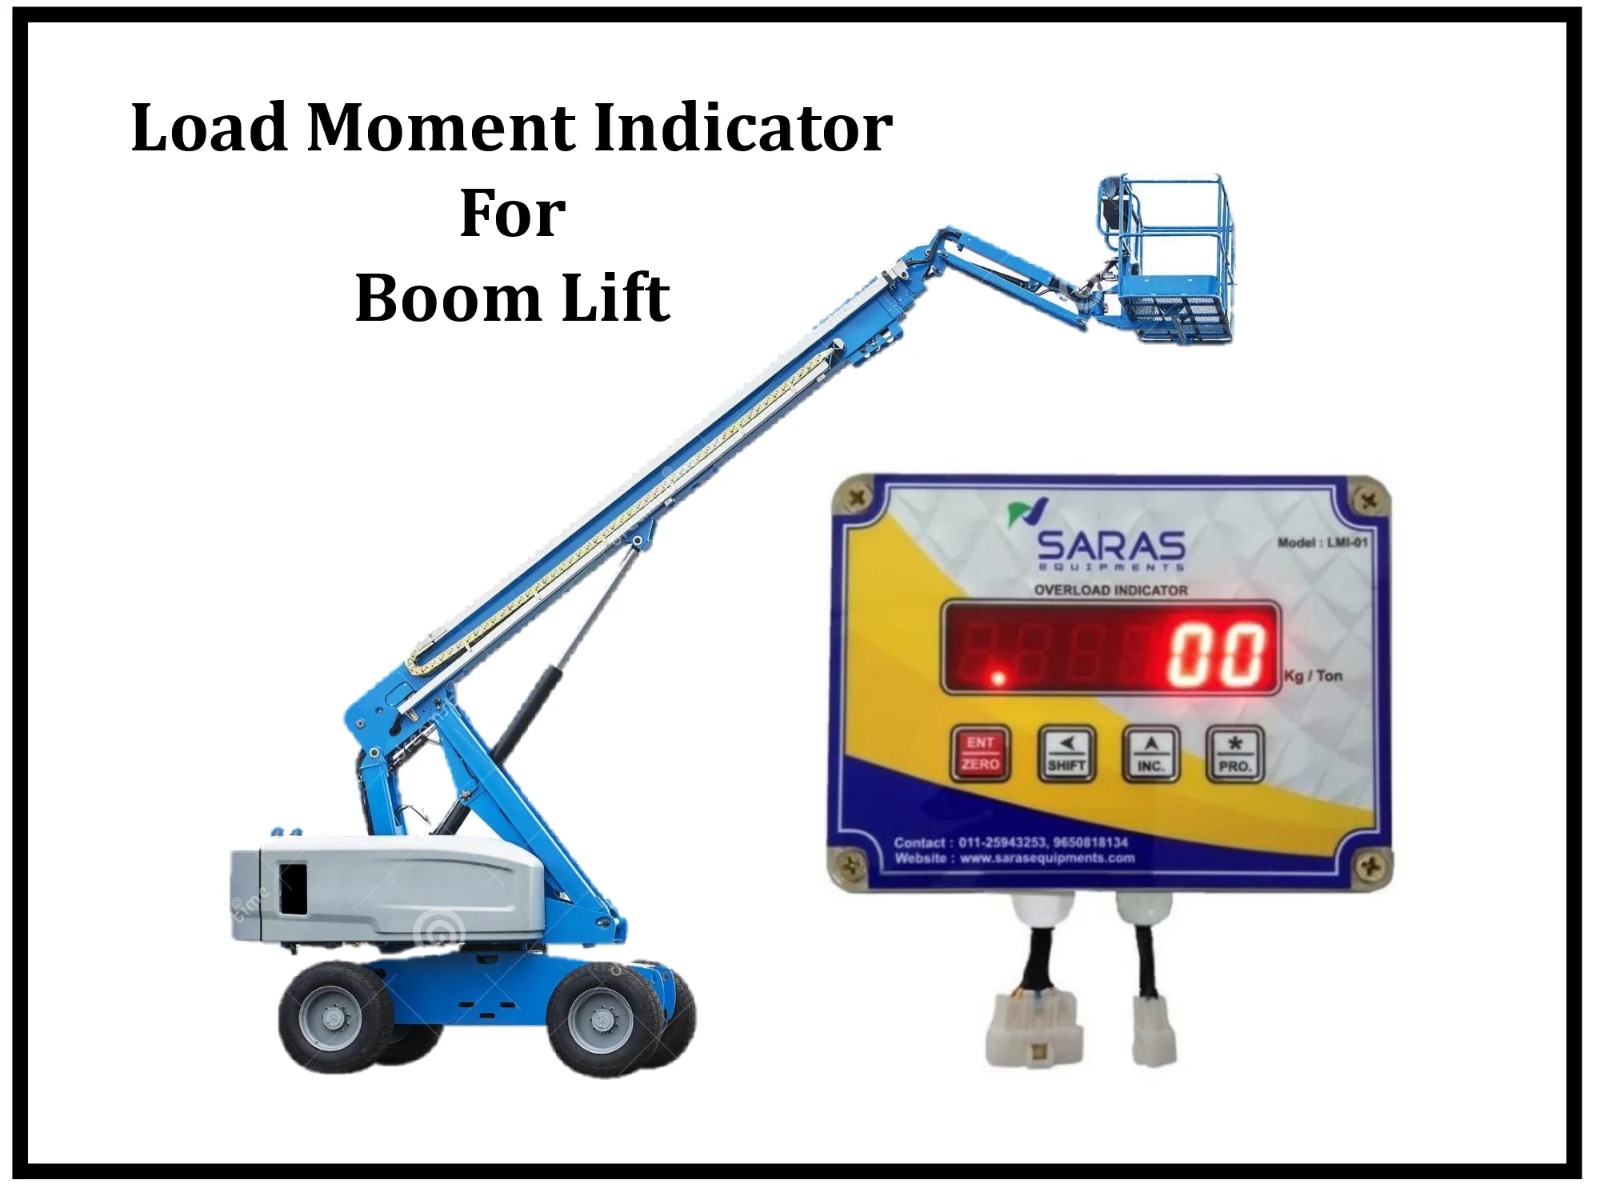 Load Moment Indicator For Boom Lift